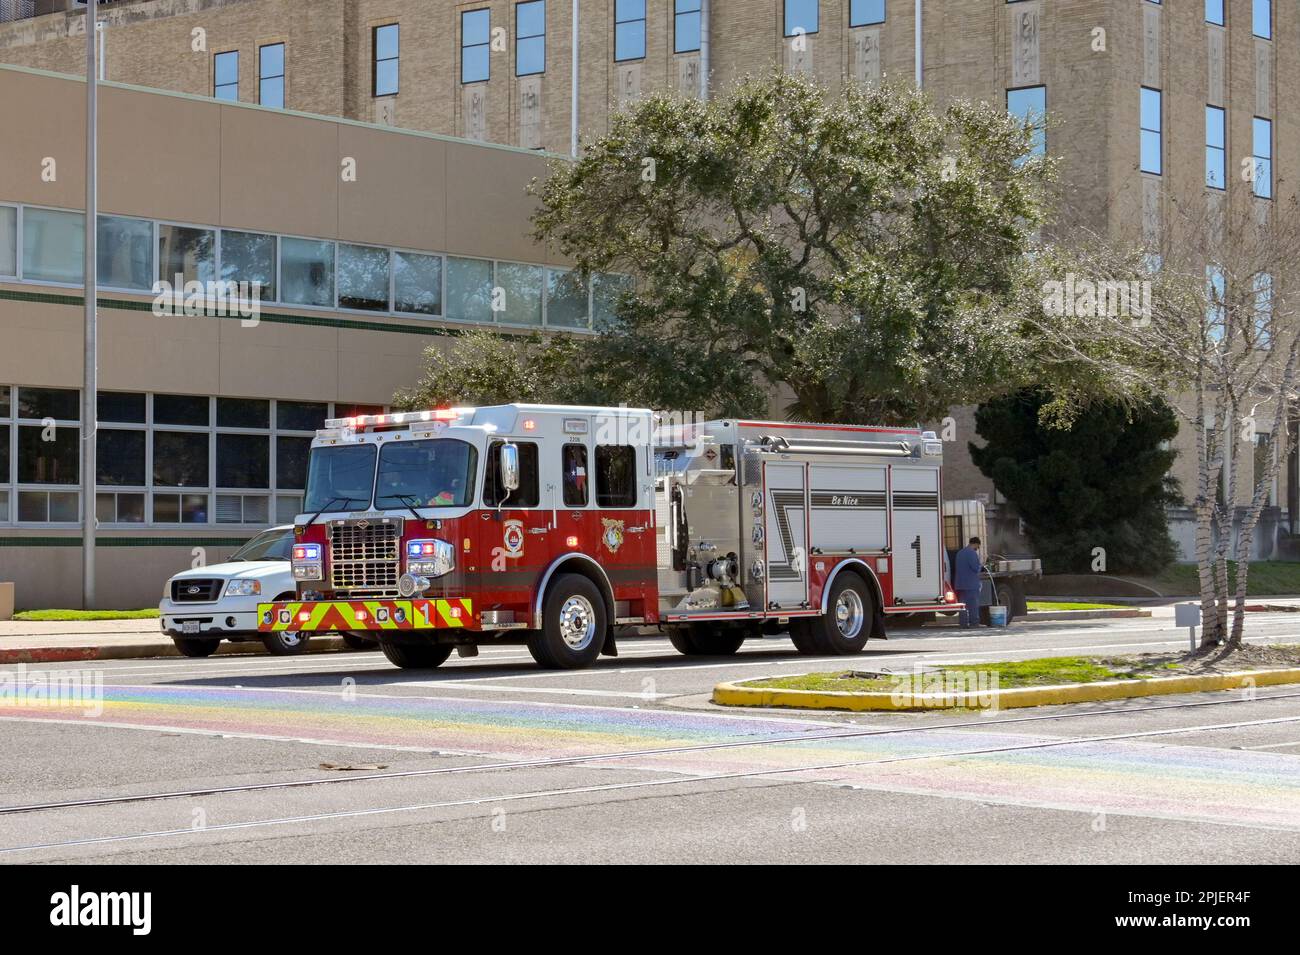 Galveston, Texas, USA - February 2023: Fire department truck with lights flashing driving on one of the city's streets Stock Photo